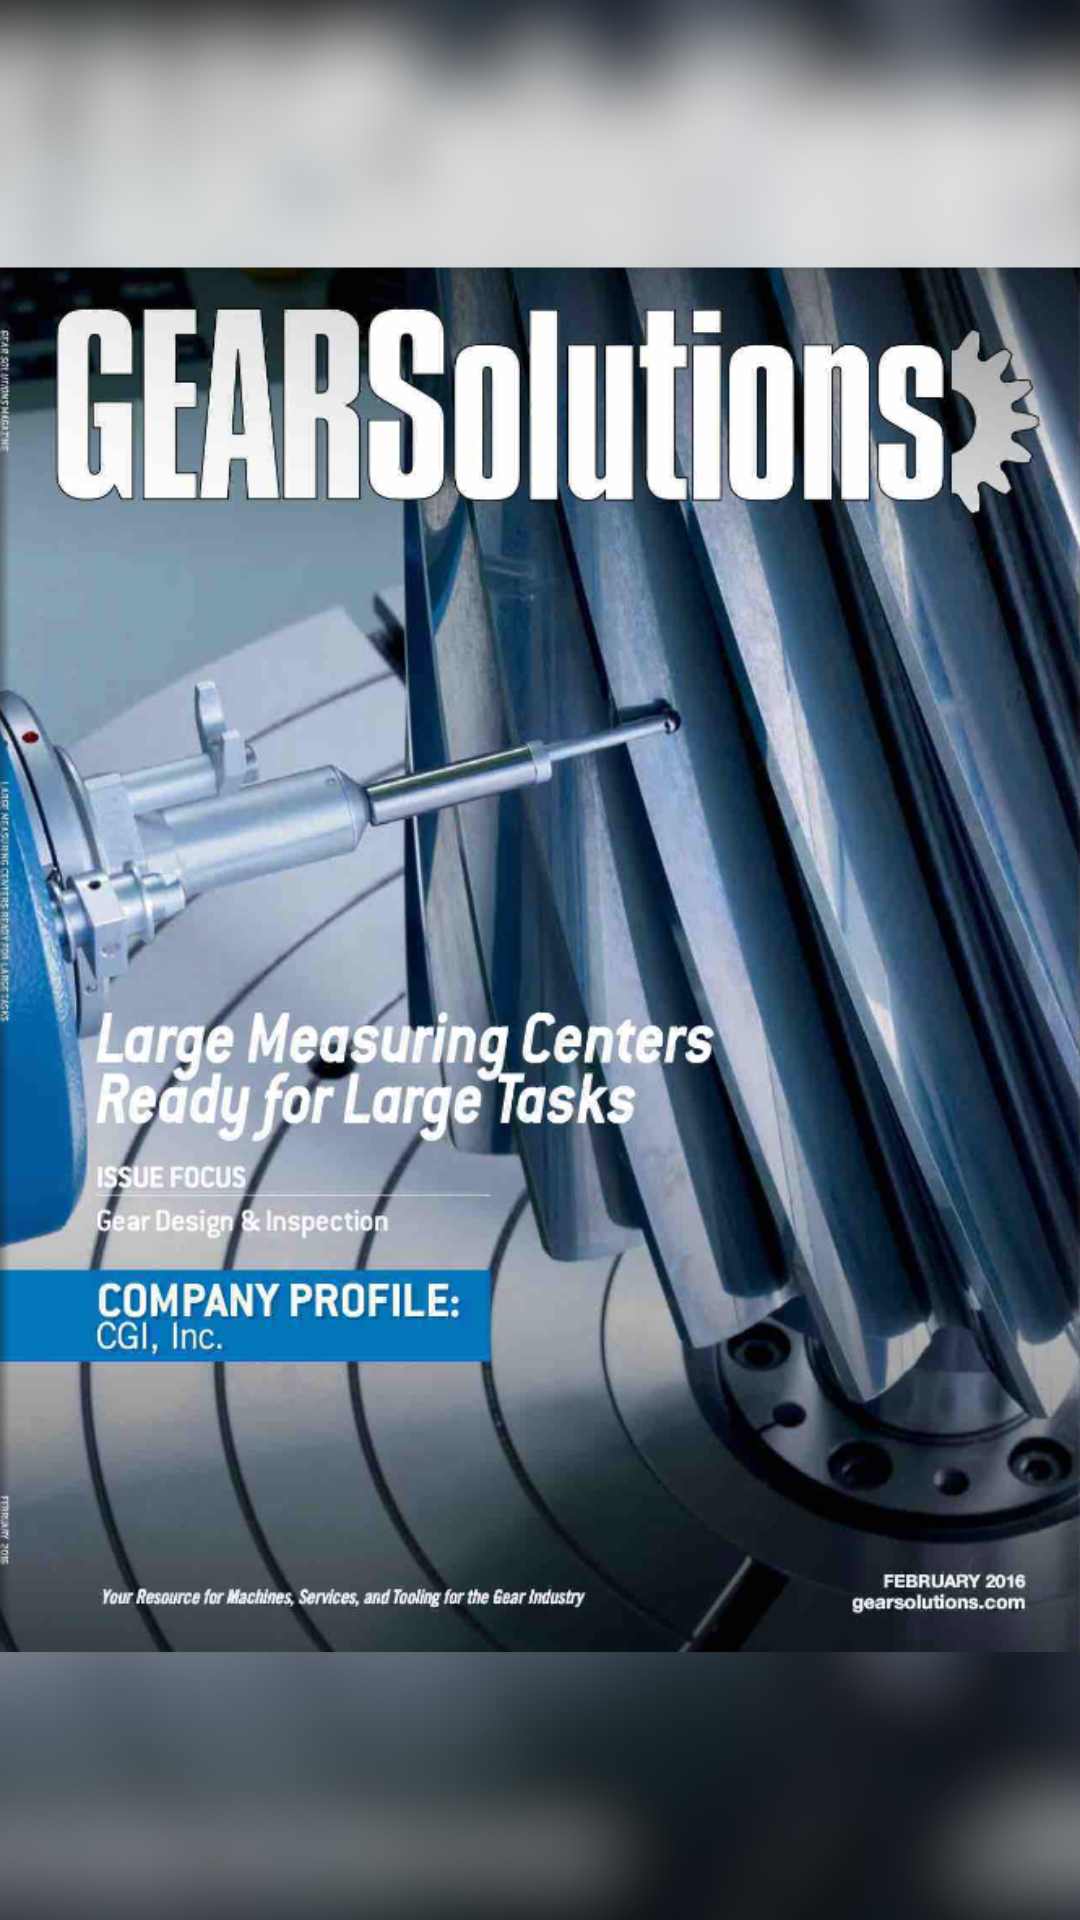 Gear Solutions Magazine February 2016 front cover 'Large Measuring Centers Ready For Large Tasks'.